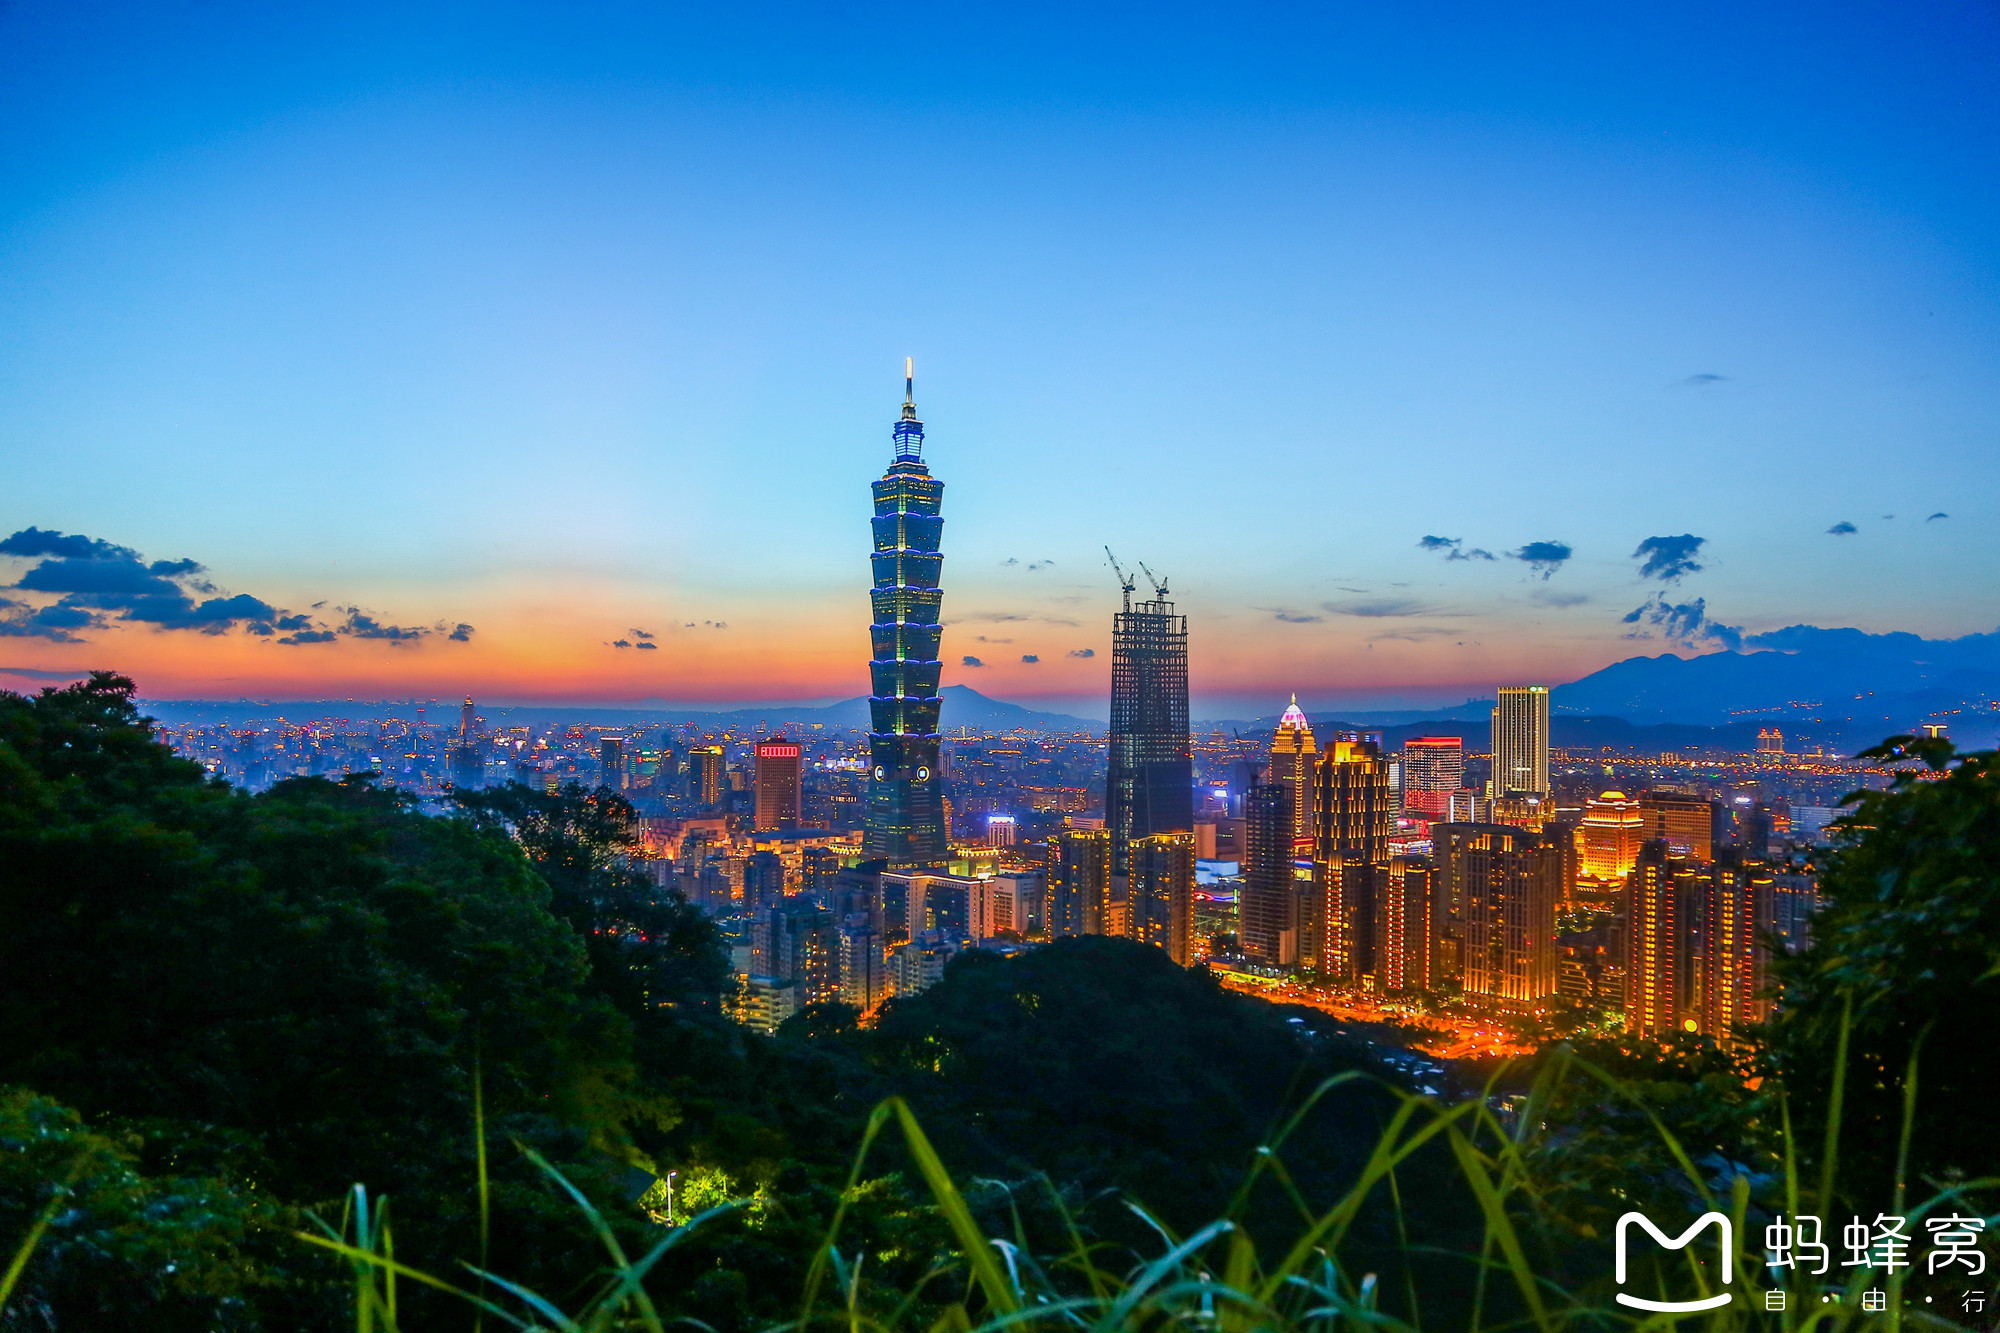 Top 10 Must Visit Tourist Attractions in Taipei, Taiwan